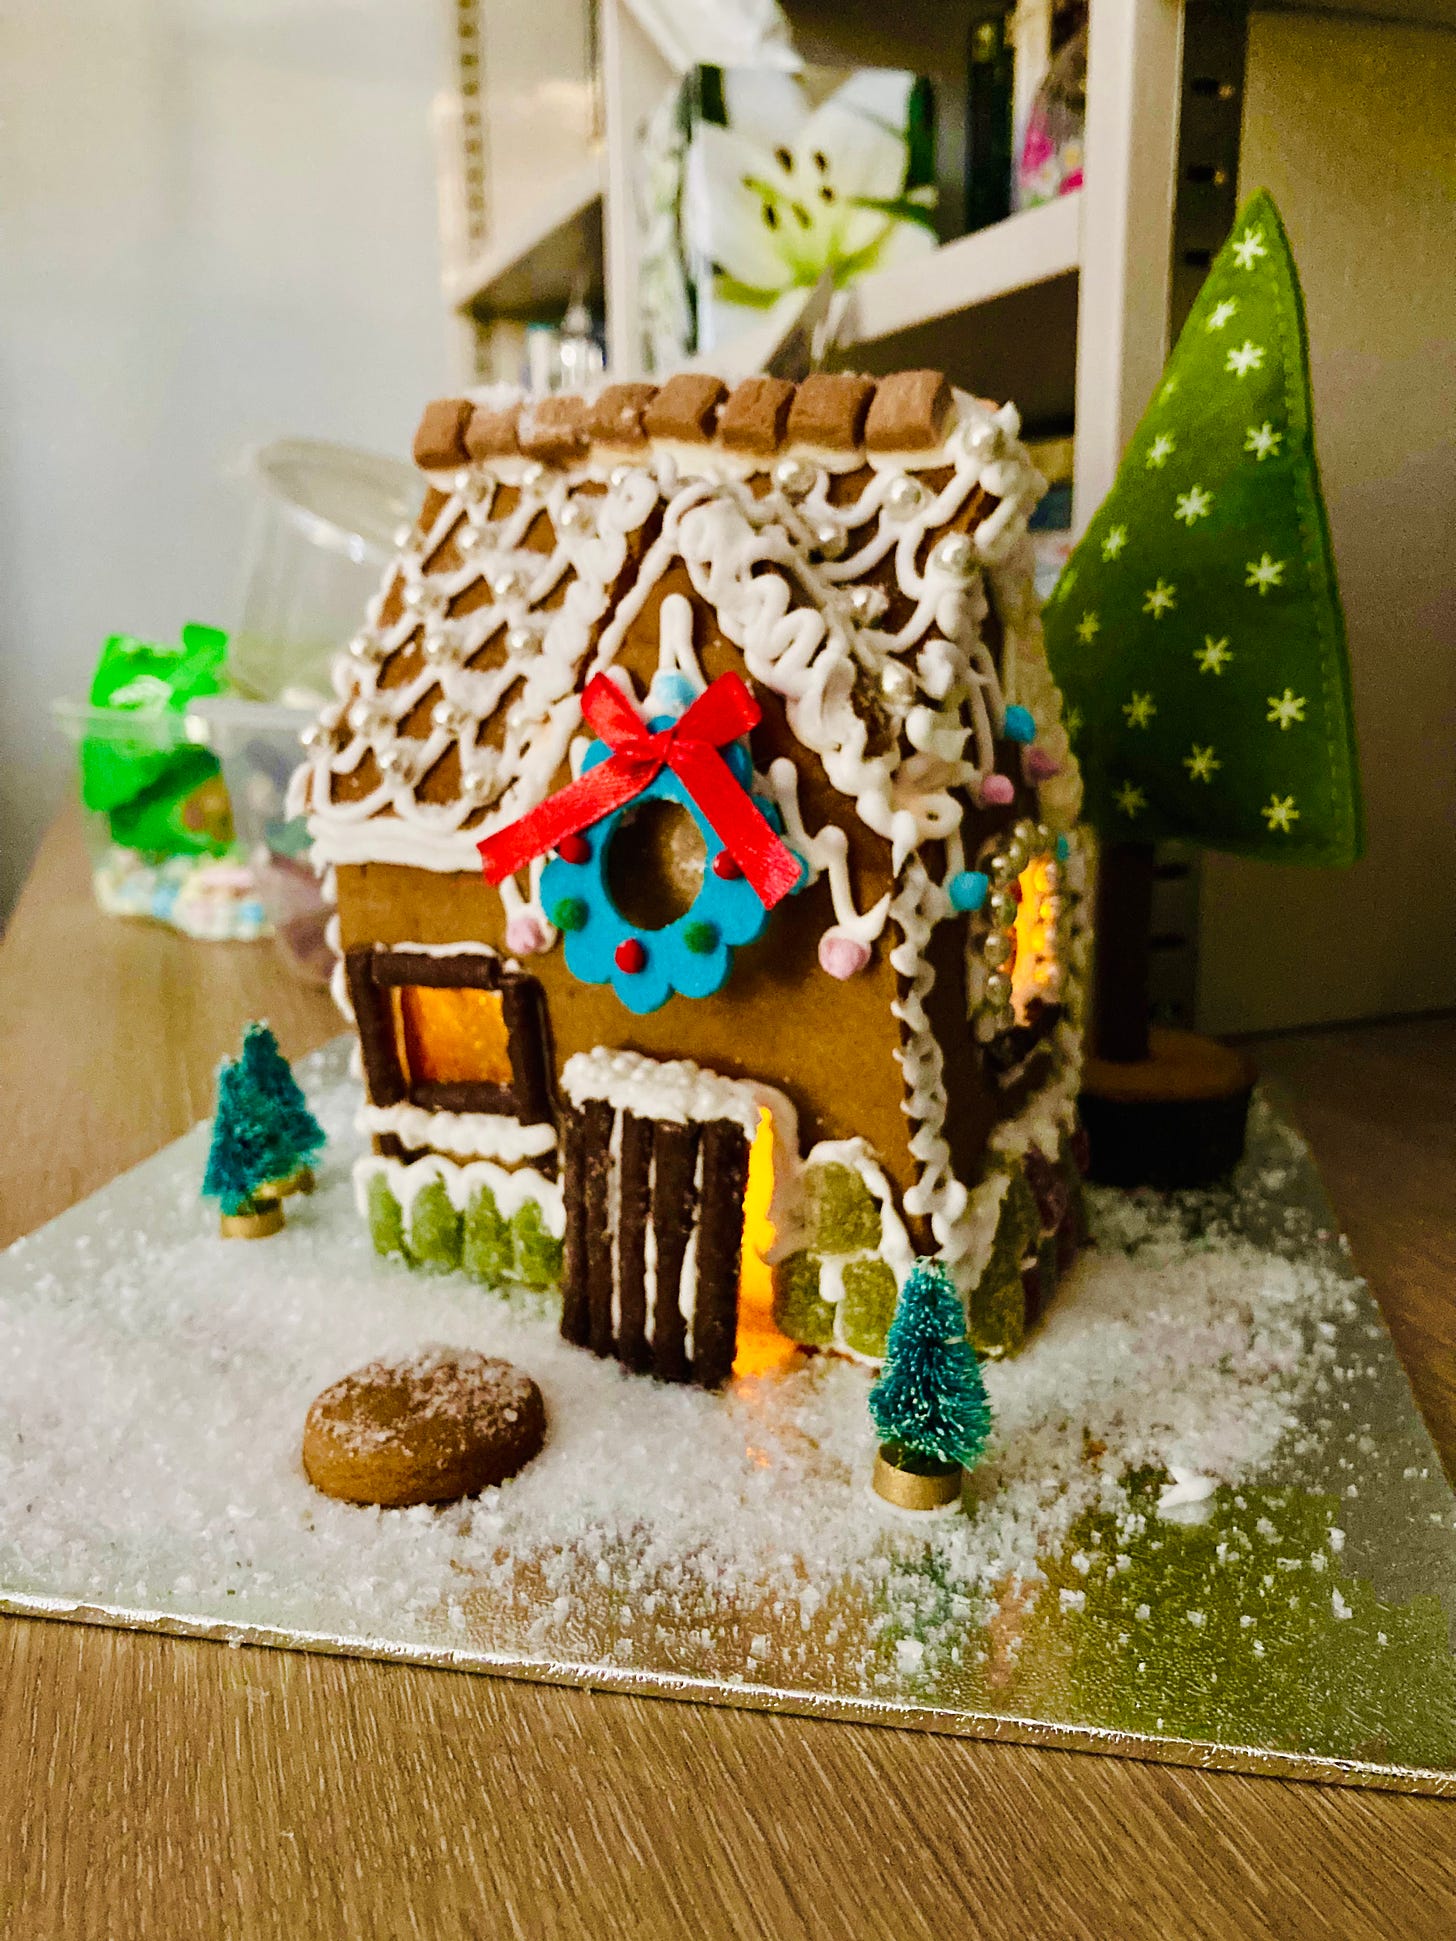 photograph of a small gingerbread cottage, with loopy white icing, pink and blue millions, green midget gem decorations, and chocolate matchstick window panes. Organge light shines through the windows and half-open door and the house is surrounded by fake white snow, three tiny christmas trees and a giant felt christmas tree. A felt wreath hangs on the front above the door.